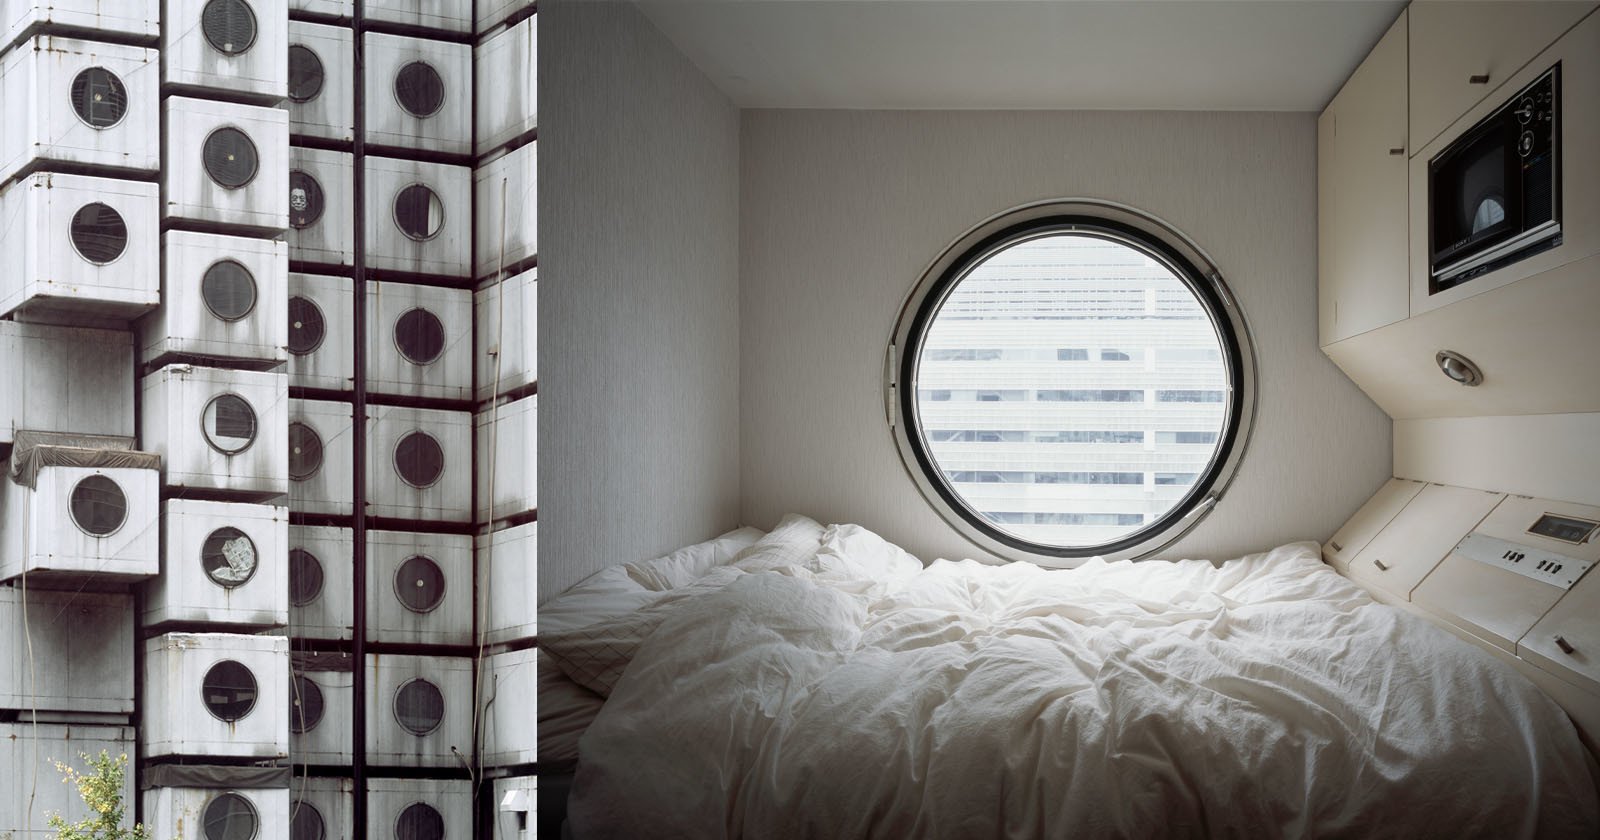 Photographers Decade Long Series on the Iconic Capsule Tower in Tokyo